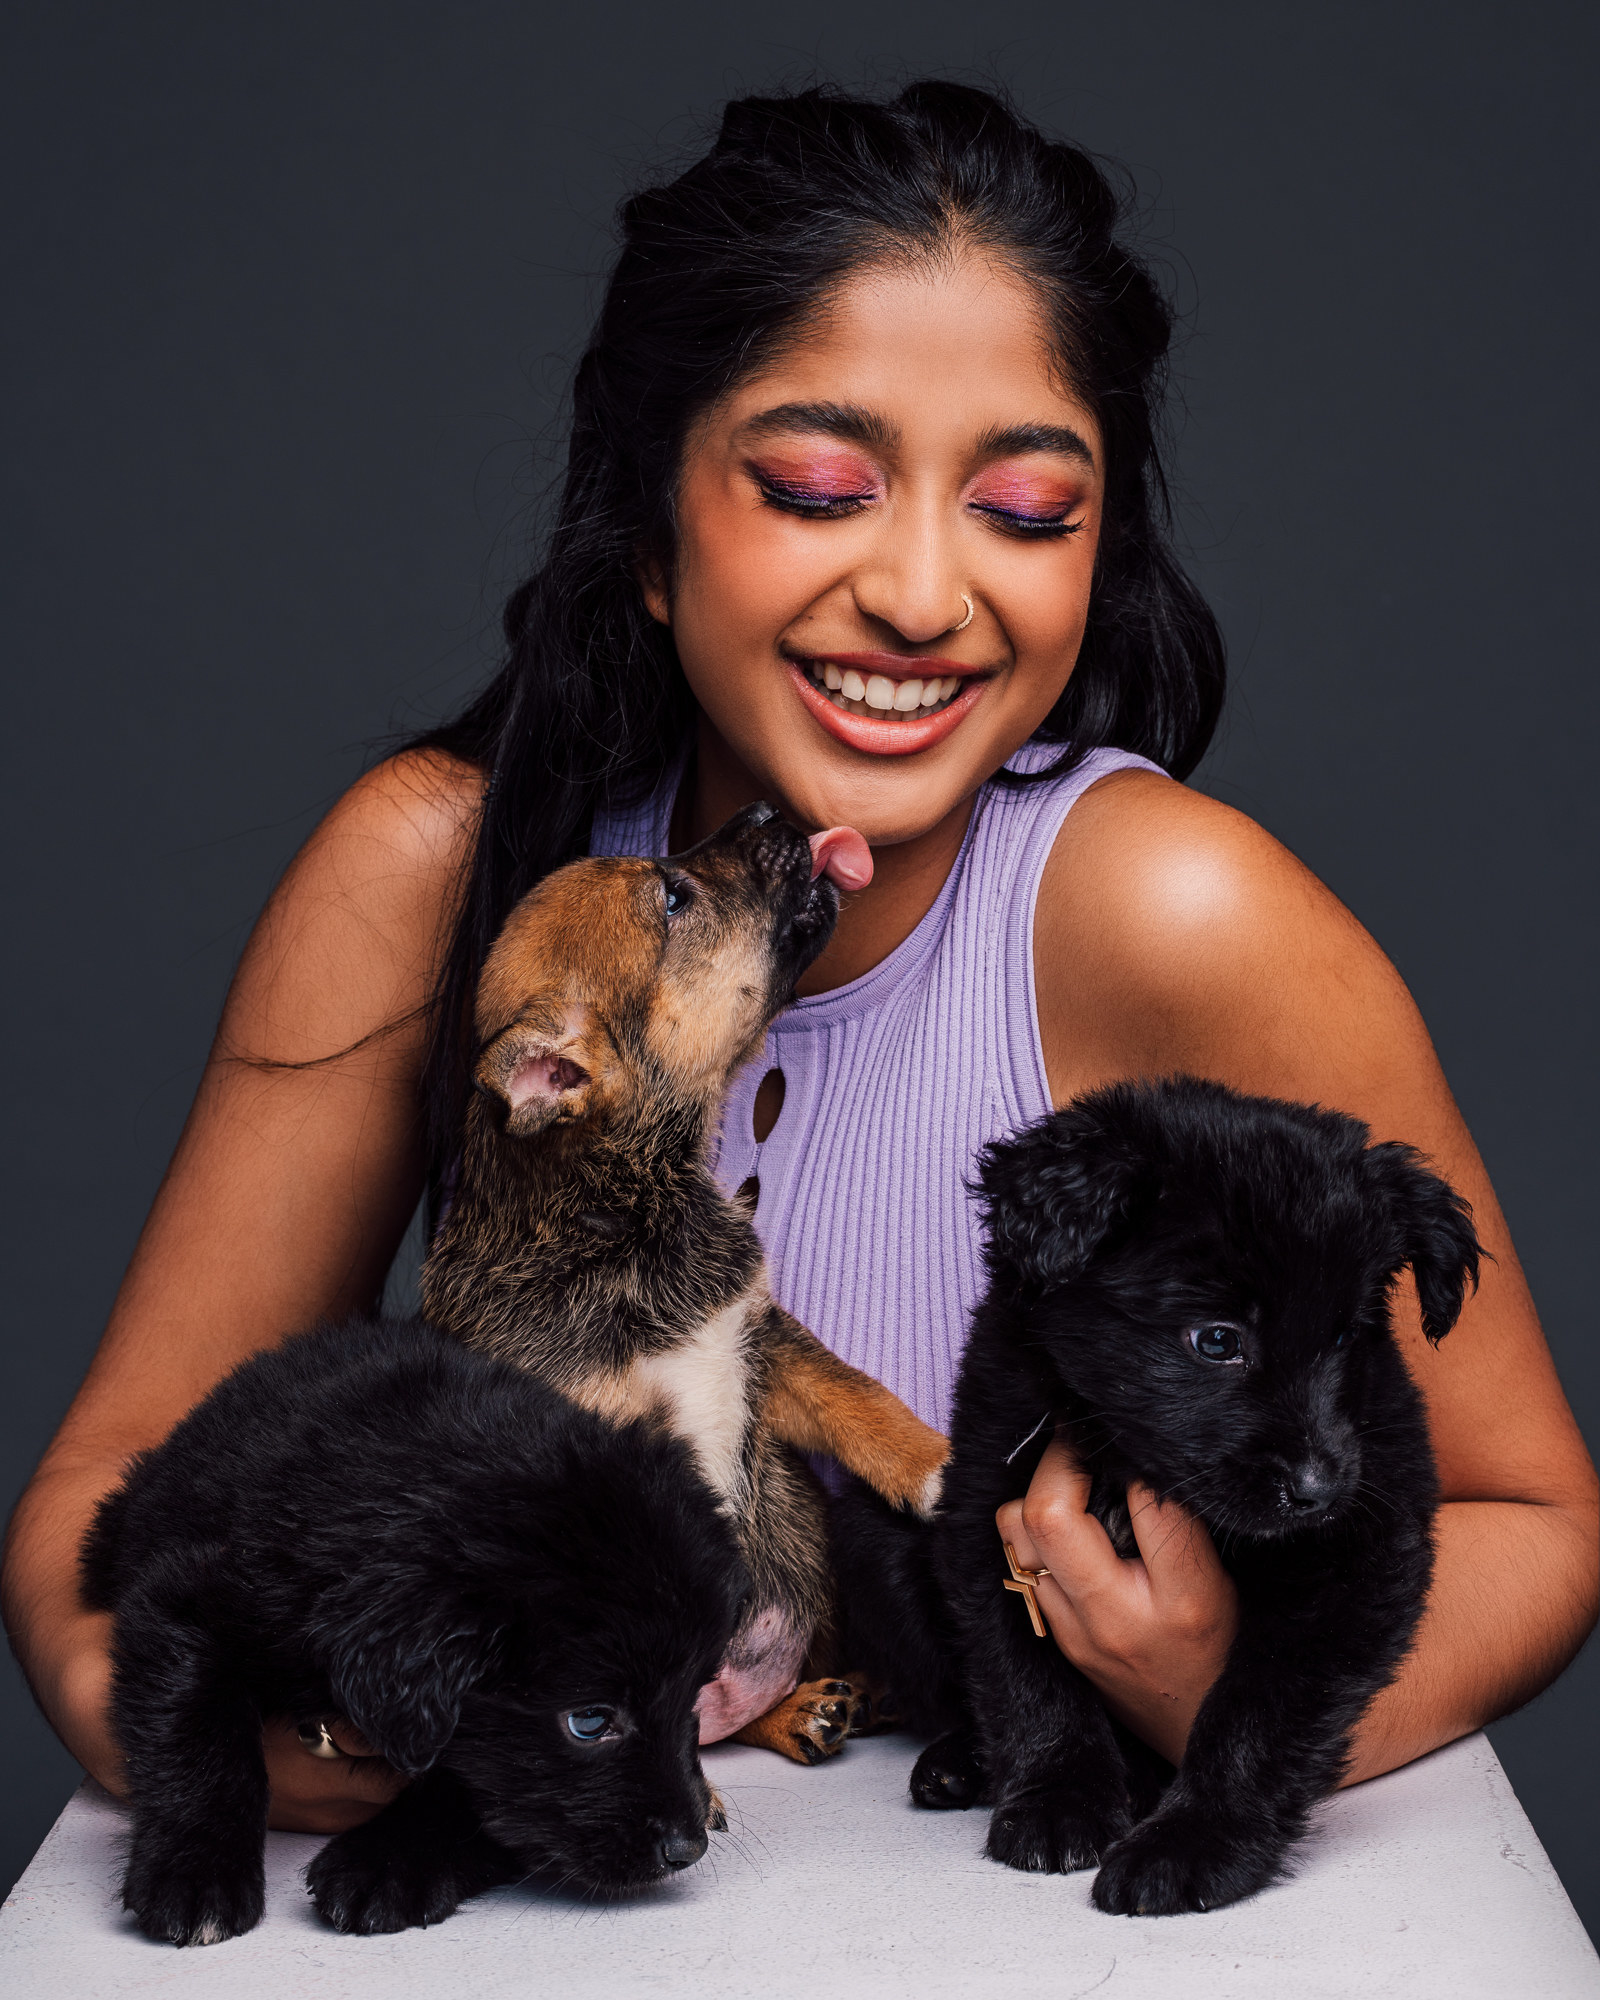 Maitreyi smiling and cuddling three adorable puppies as one licks her chin